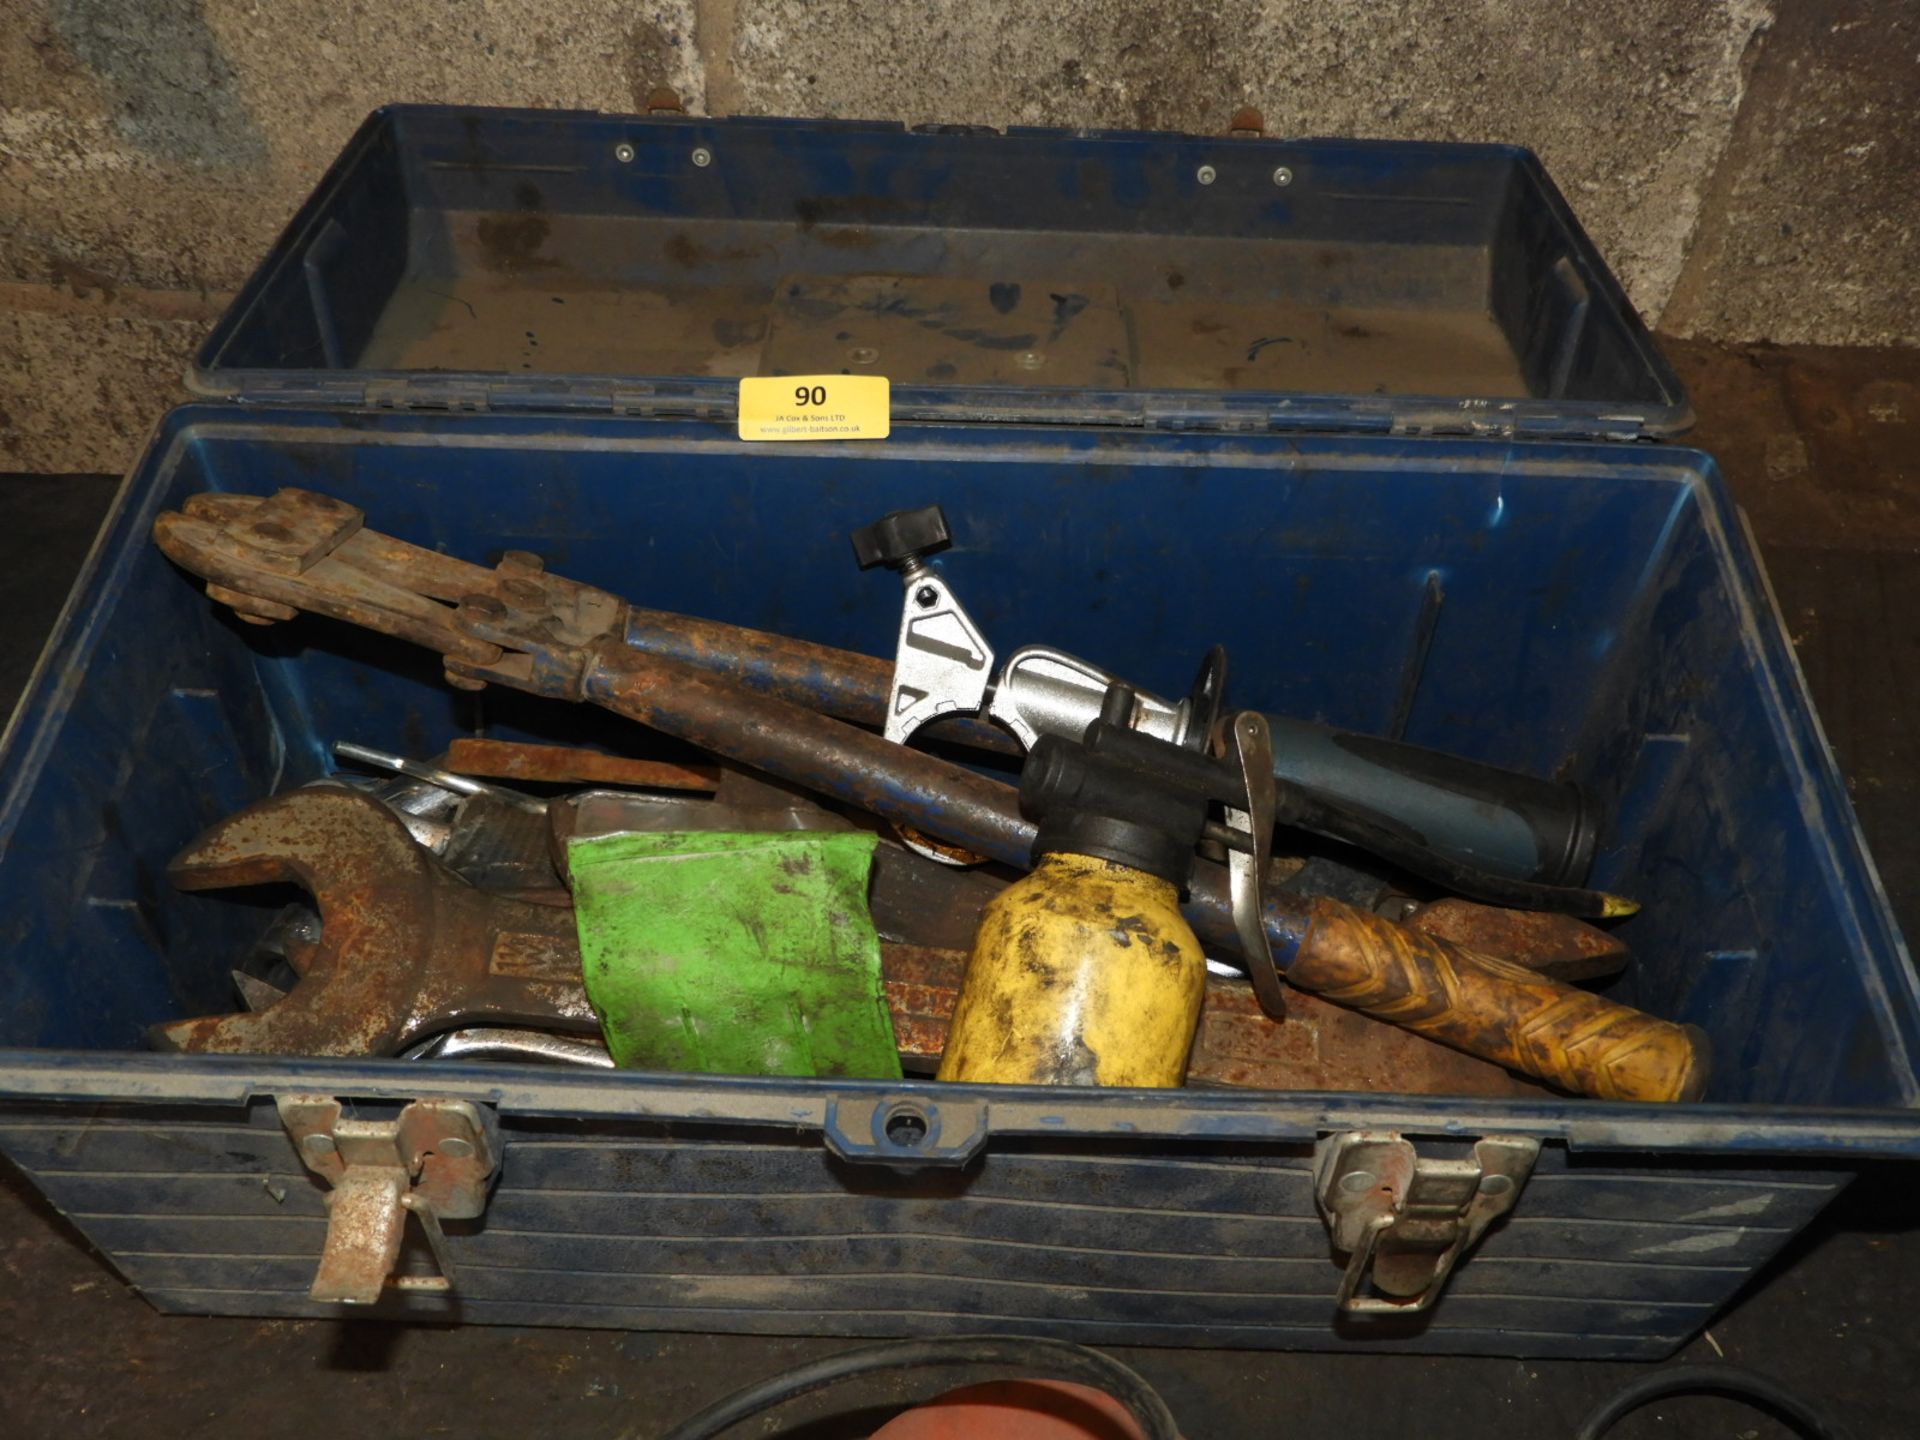 *Toolbox Containing Bolt Croppers, etc.